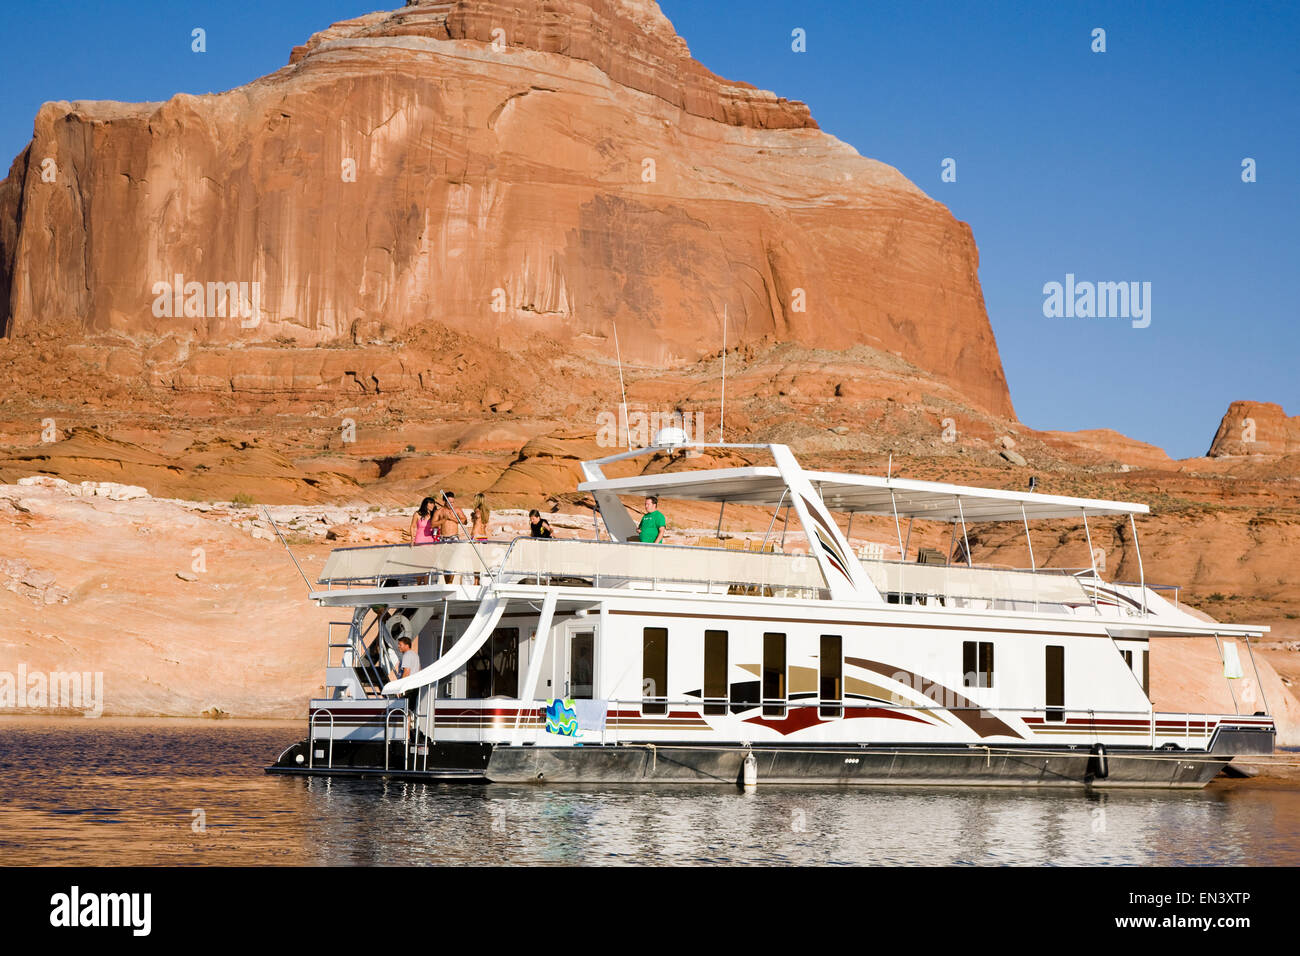 people on a houseboat on lake powell Stock Photo